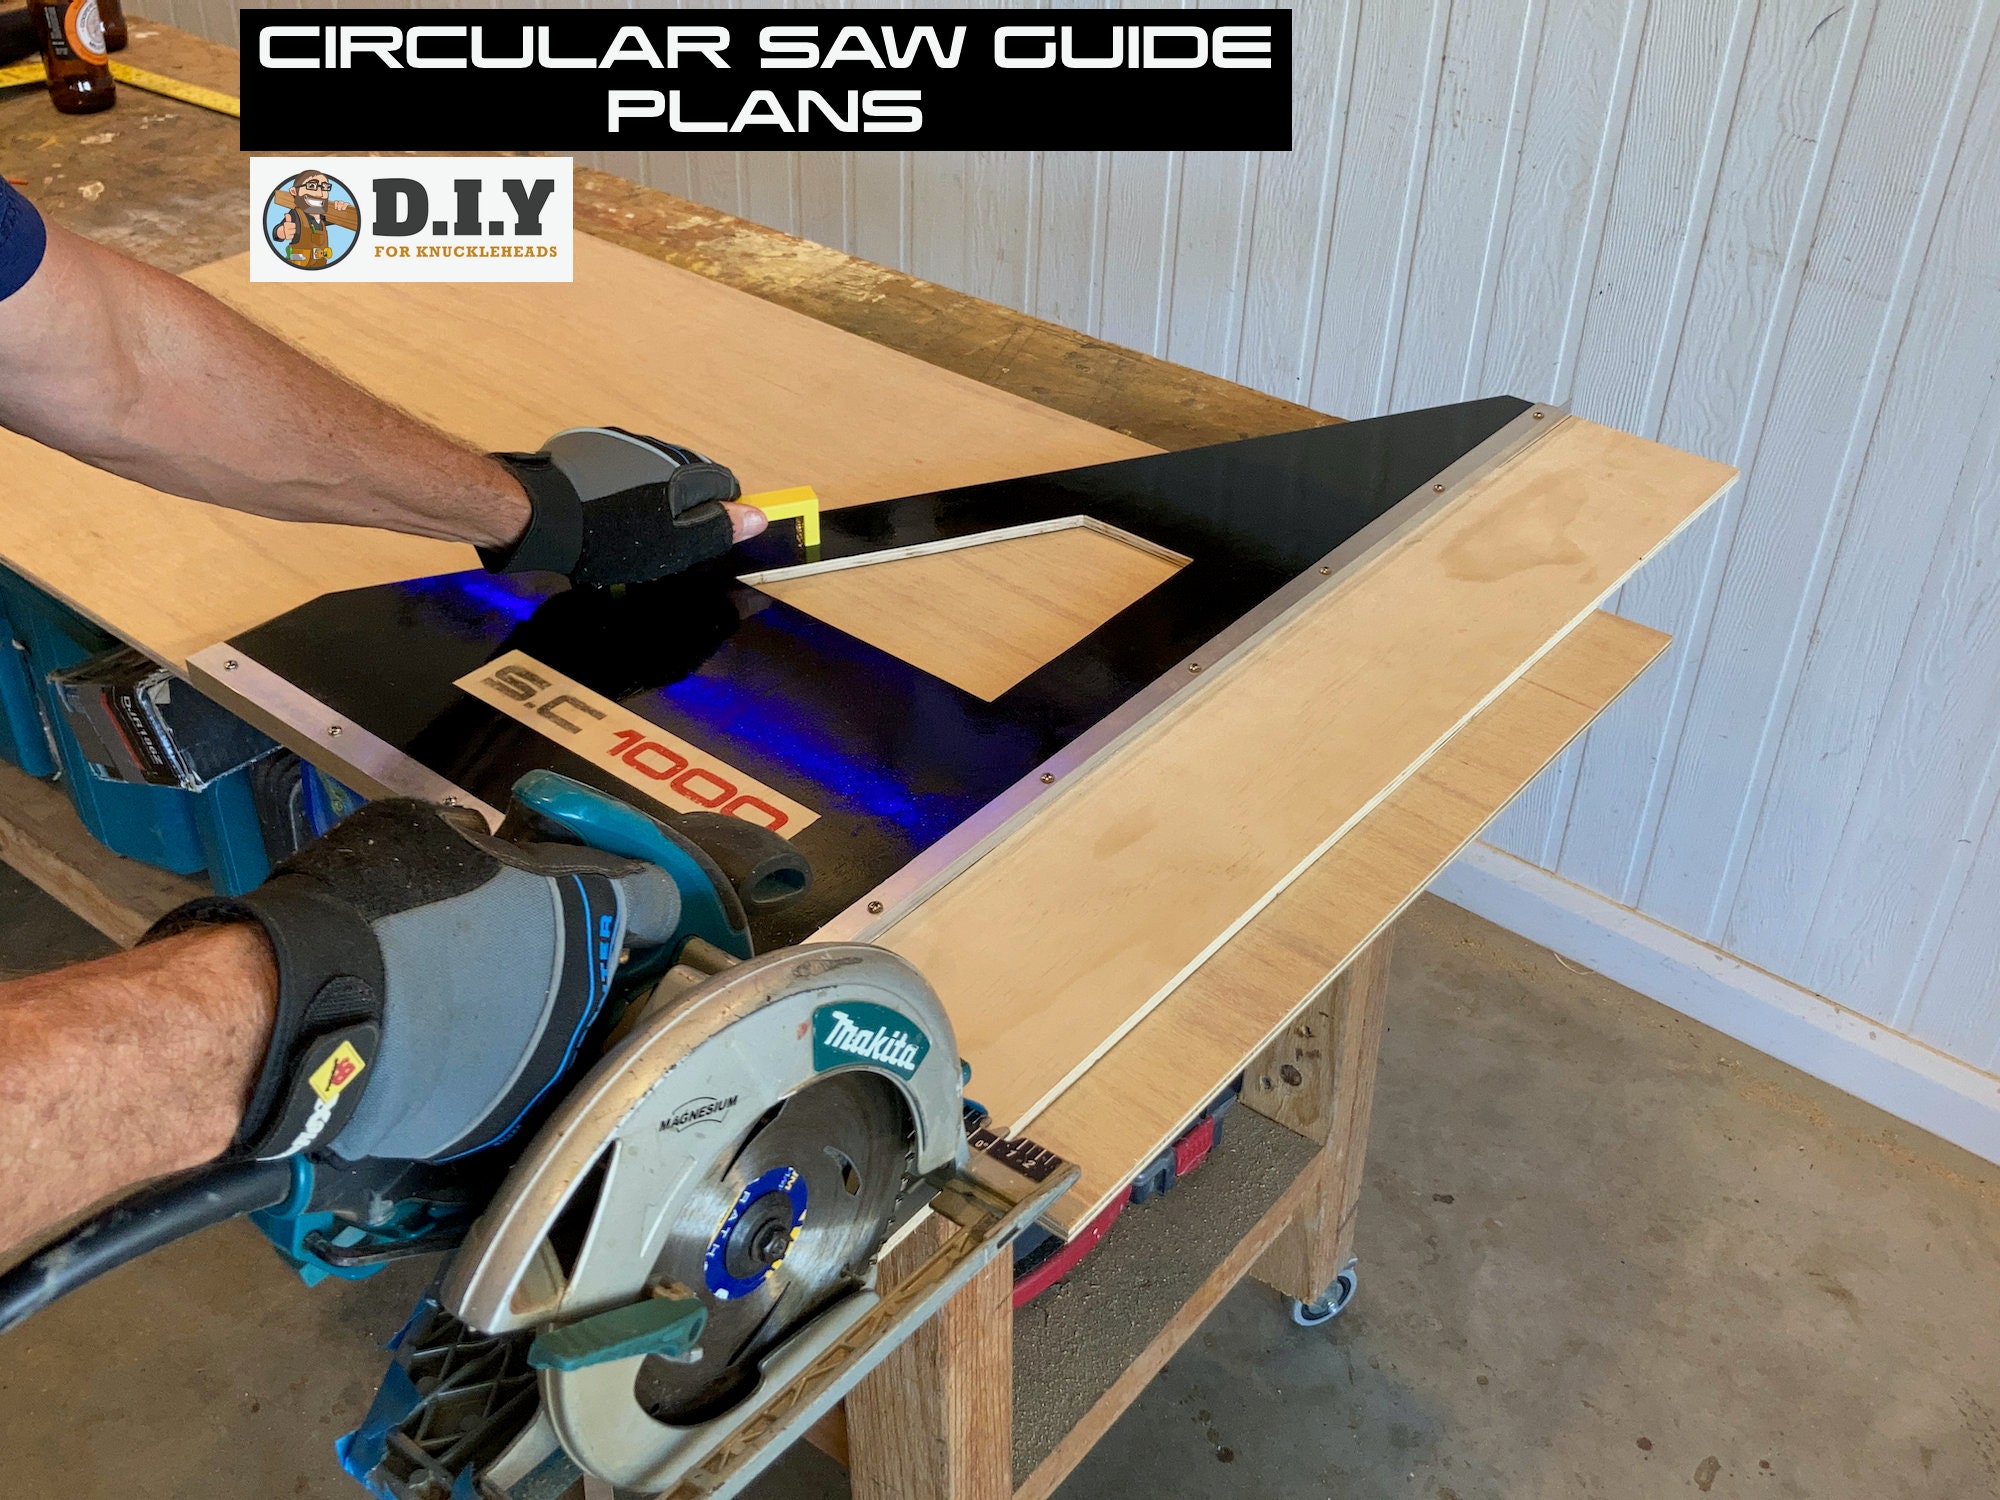 How to Make a Cutting Guide for Your Circular Saw